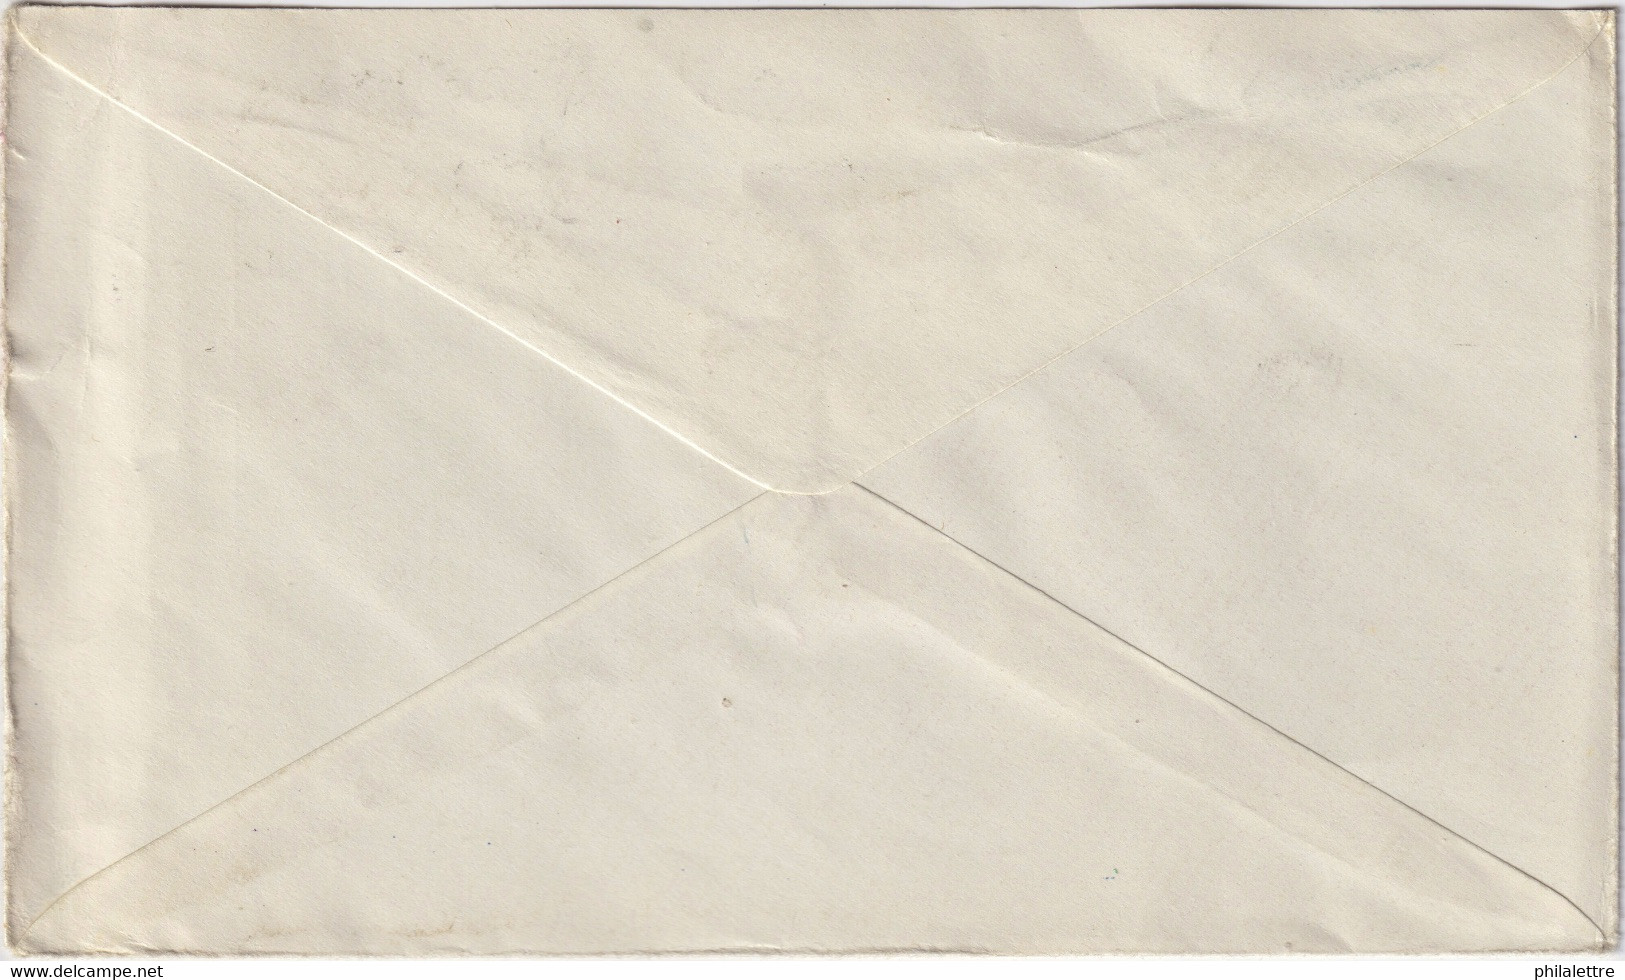 INDE / INDIA - 1936 (Dec 5) 7-1/2As / 8As Air Mail Envelope -POONA To Glasgow, Scotland - 1936-47 King George VI